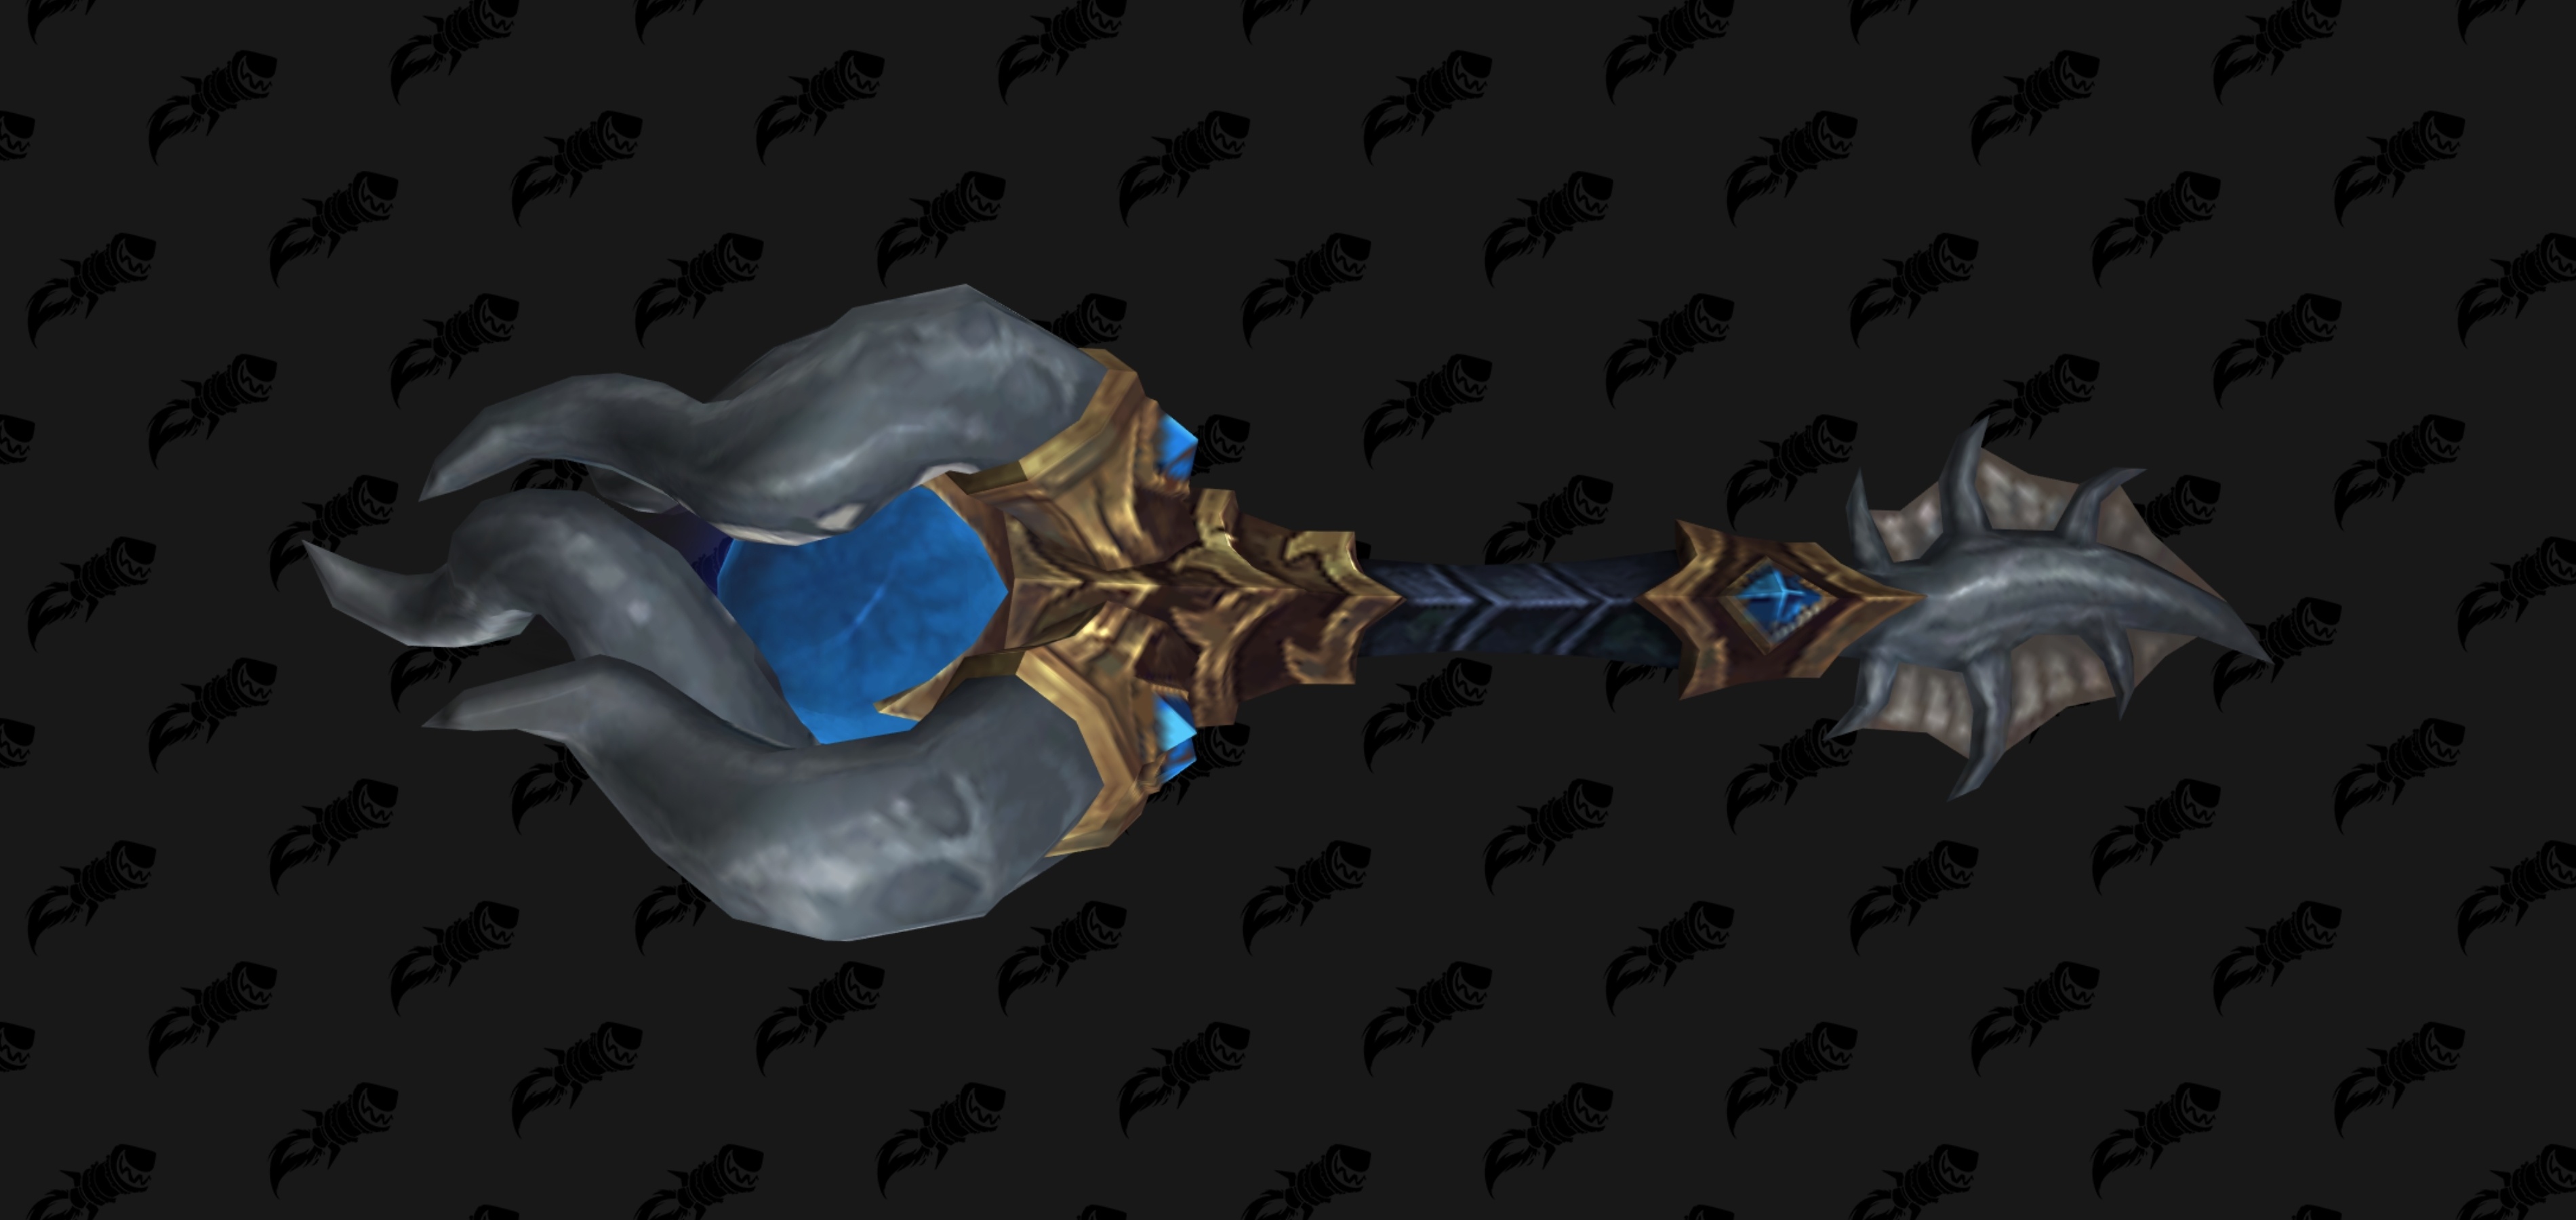 Battle For Azeroth Season 4 Pvp Rewards And Transmog Guides